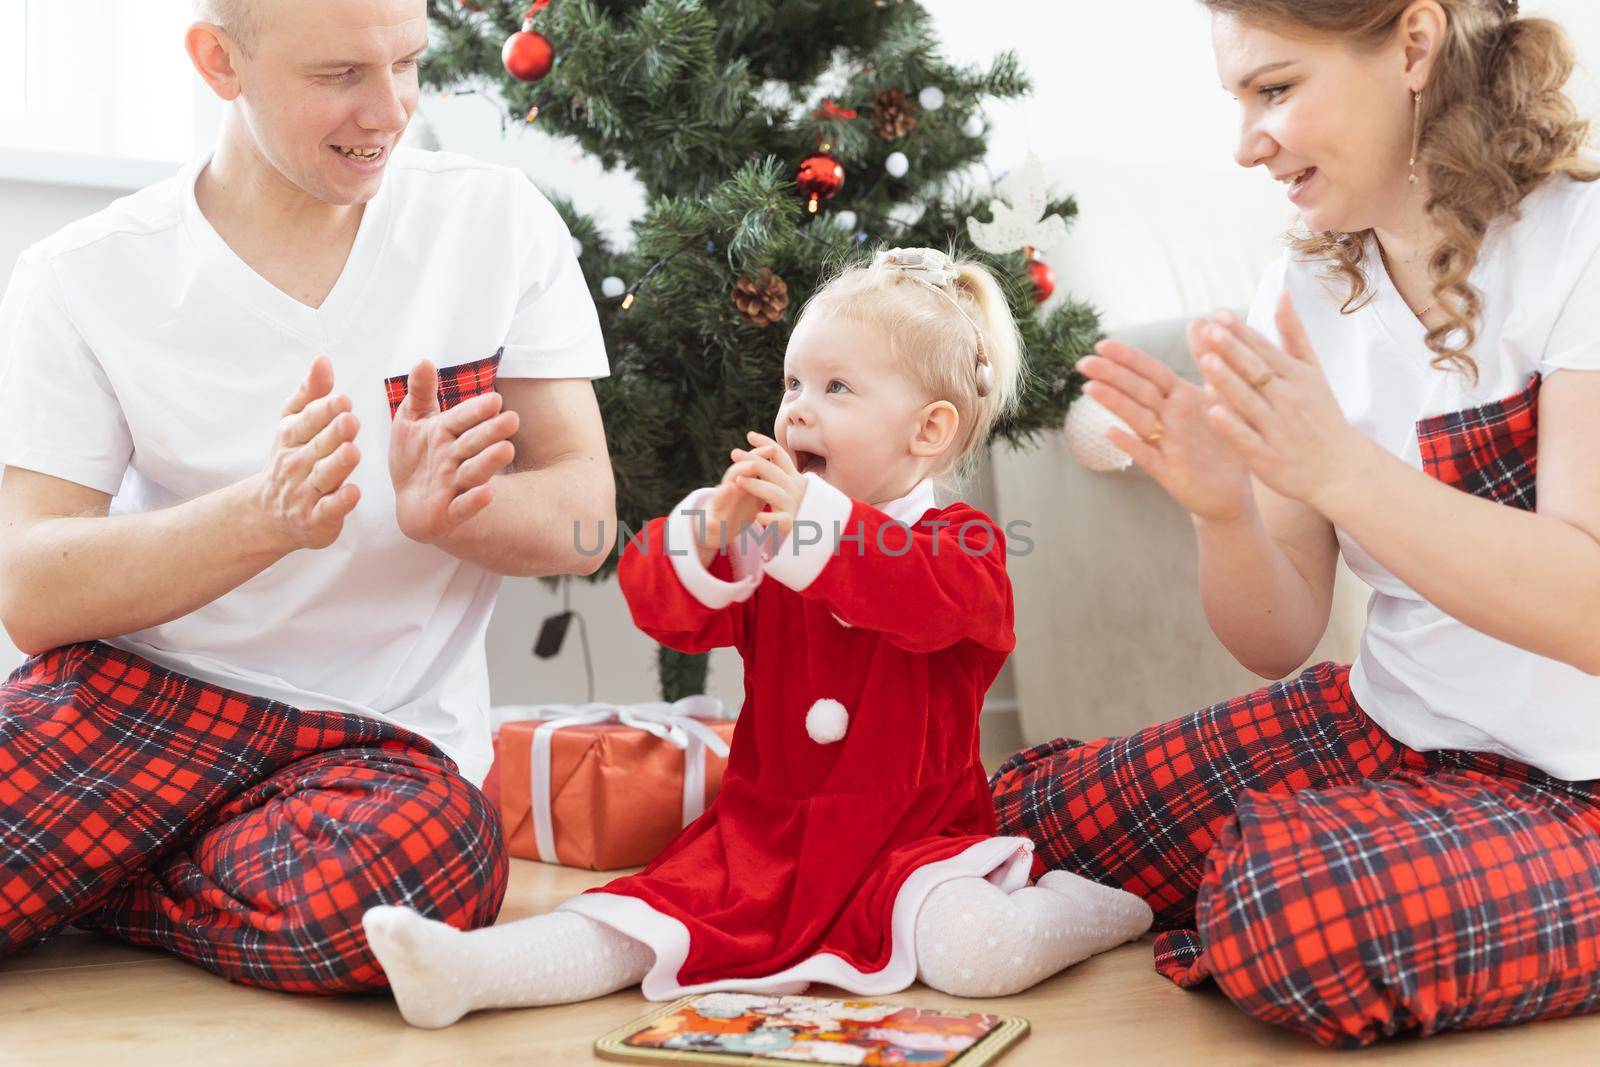 Toddler child with cochlear implant plays with parents under christmas tree - deafness and innovating medical technologies for hearing aid by Satura86